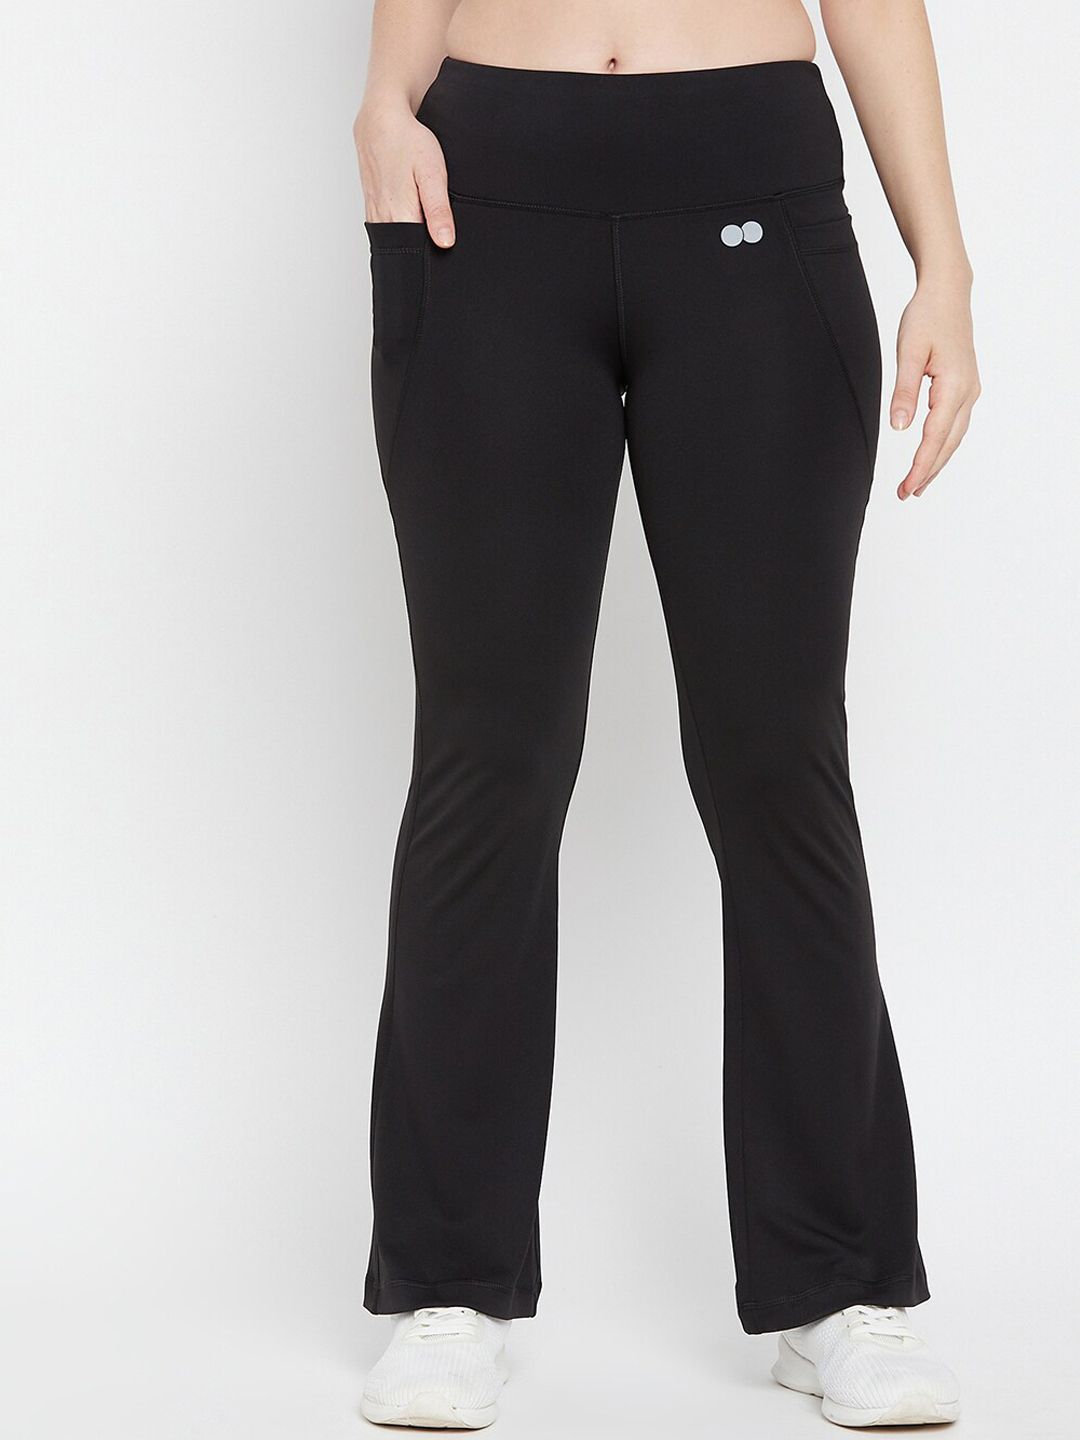 Clovia Women Black Solid Comfort-Fit Flared Yoga Pants Price in India